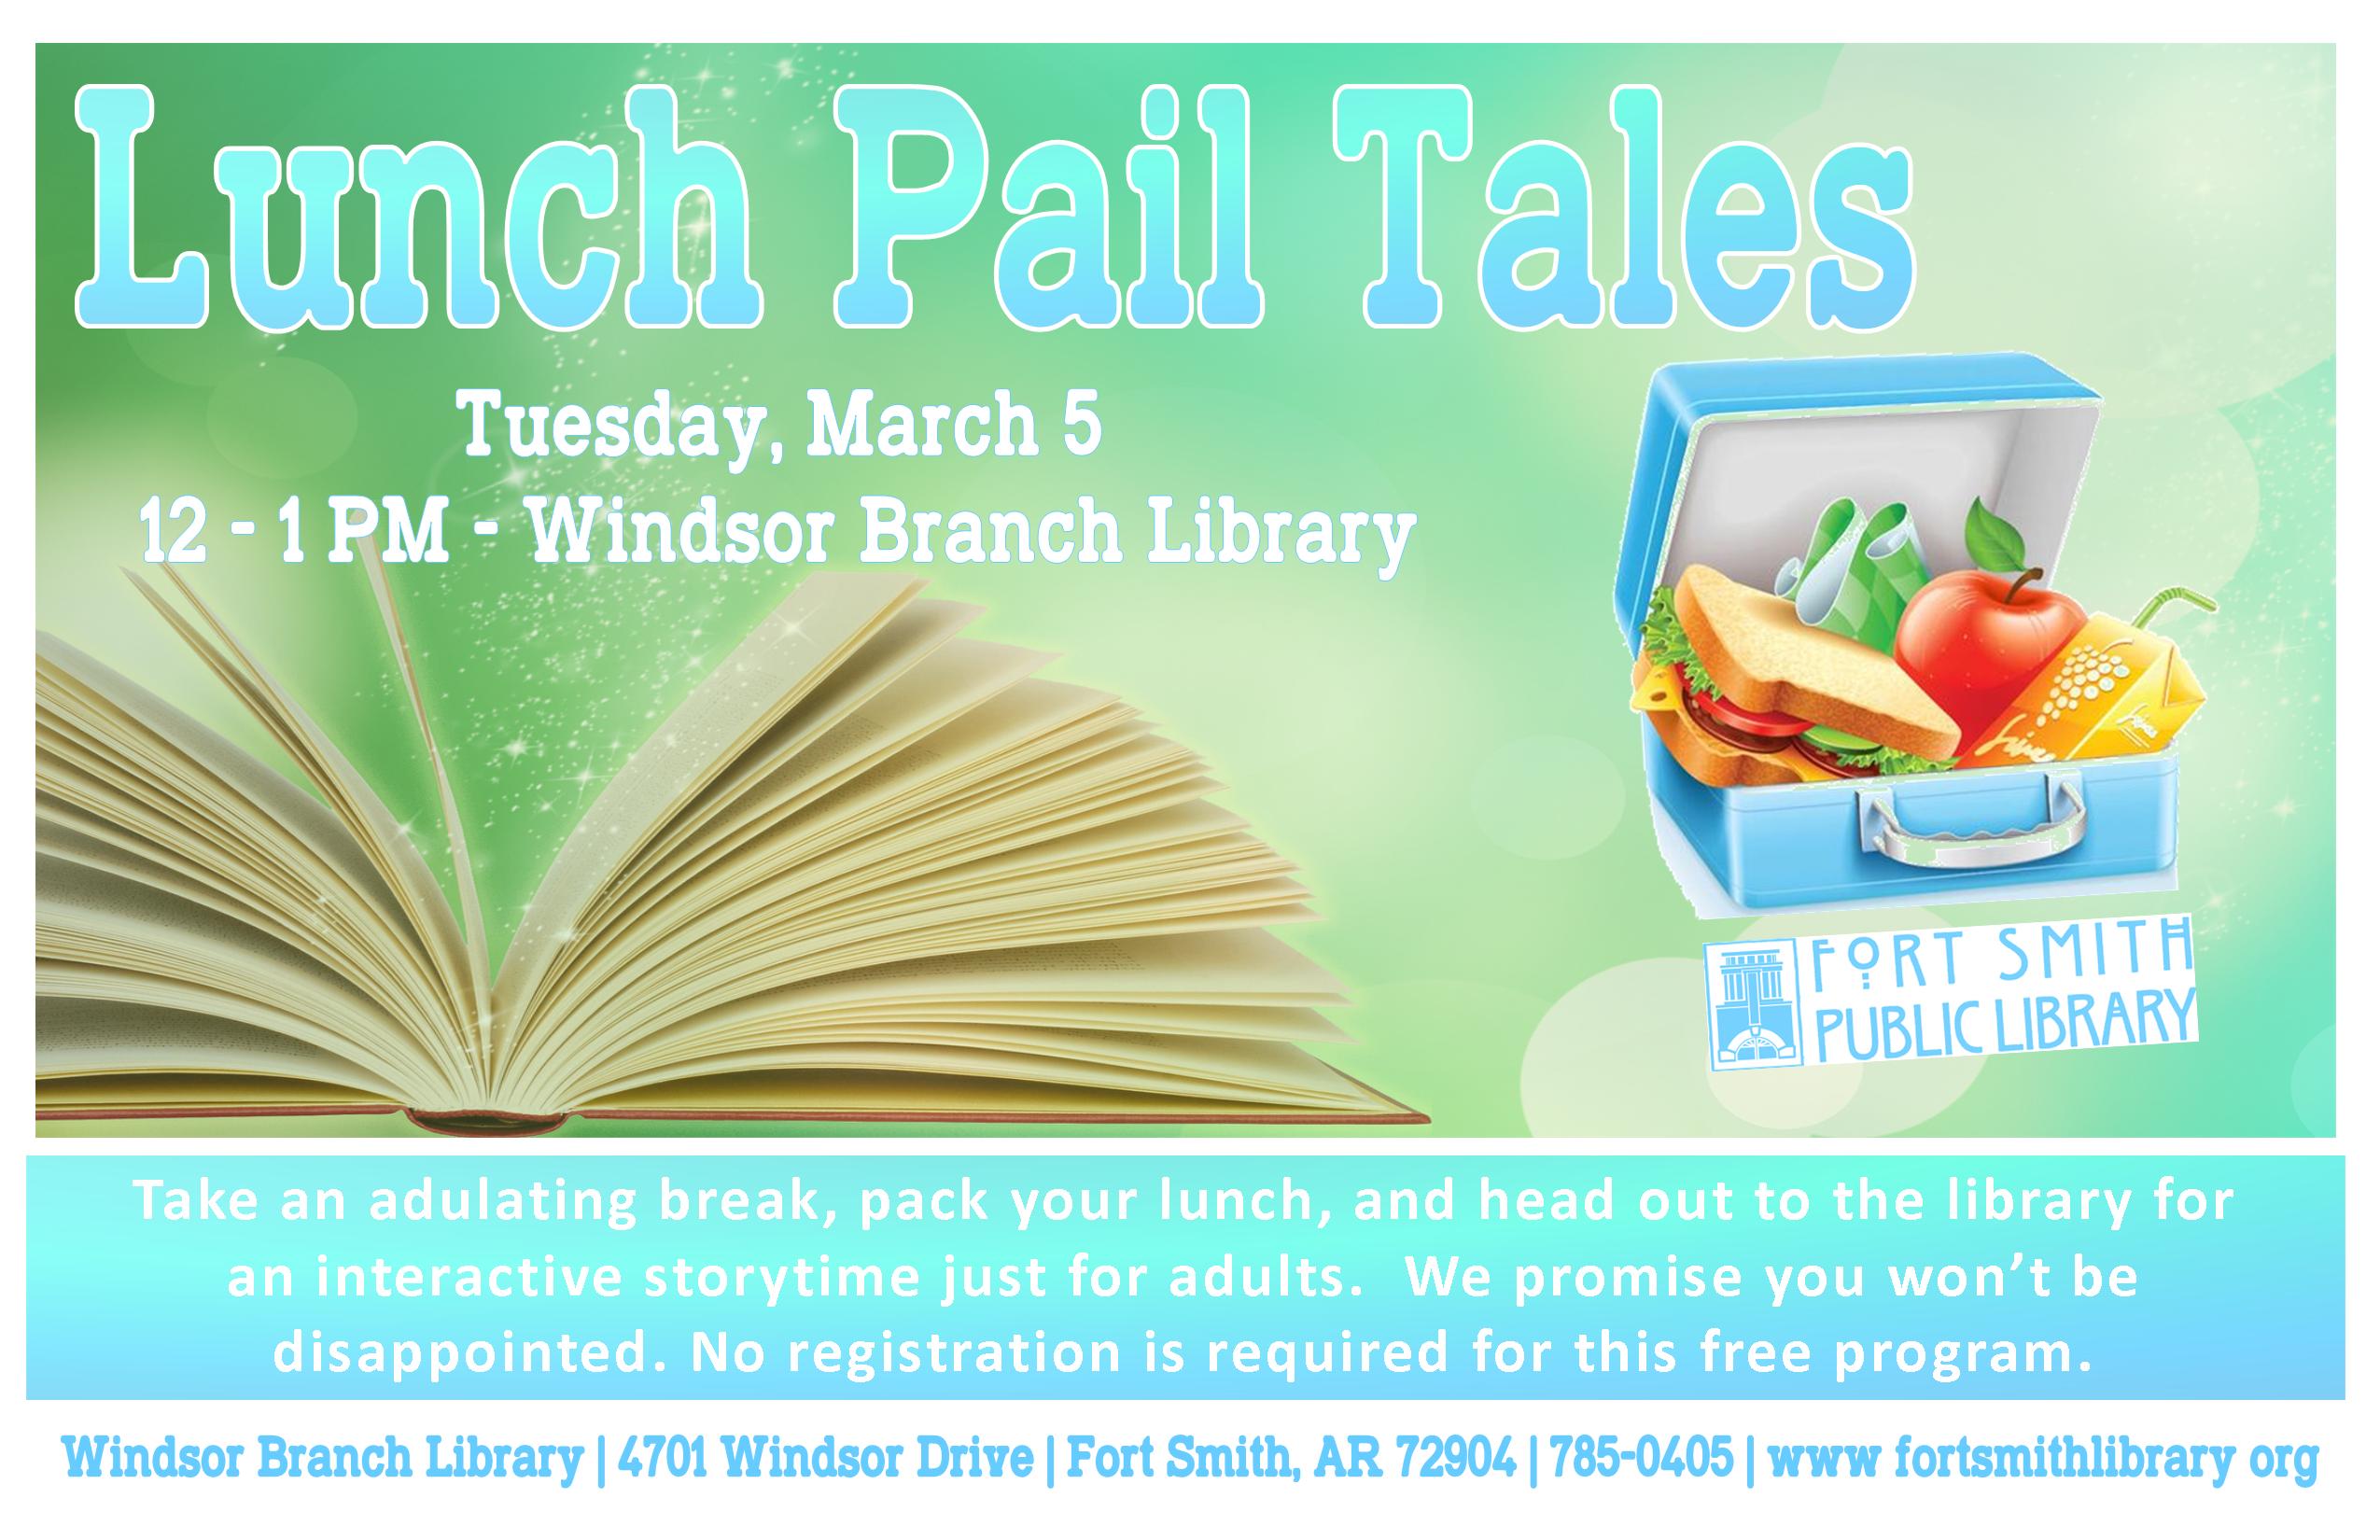 Lunch pail tales poster